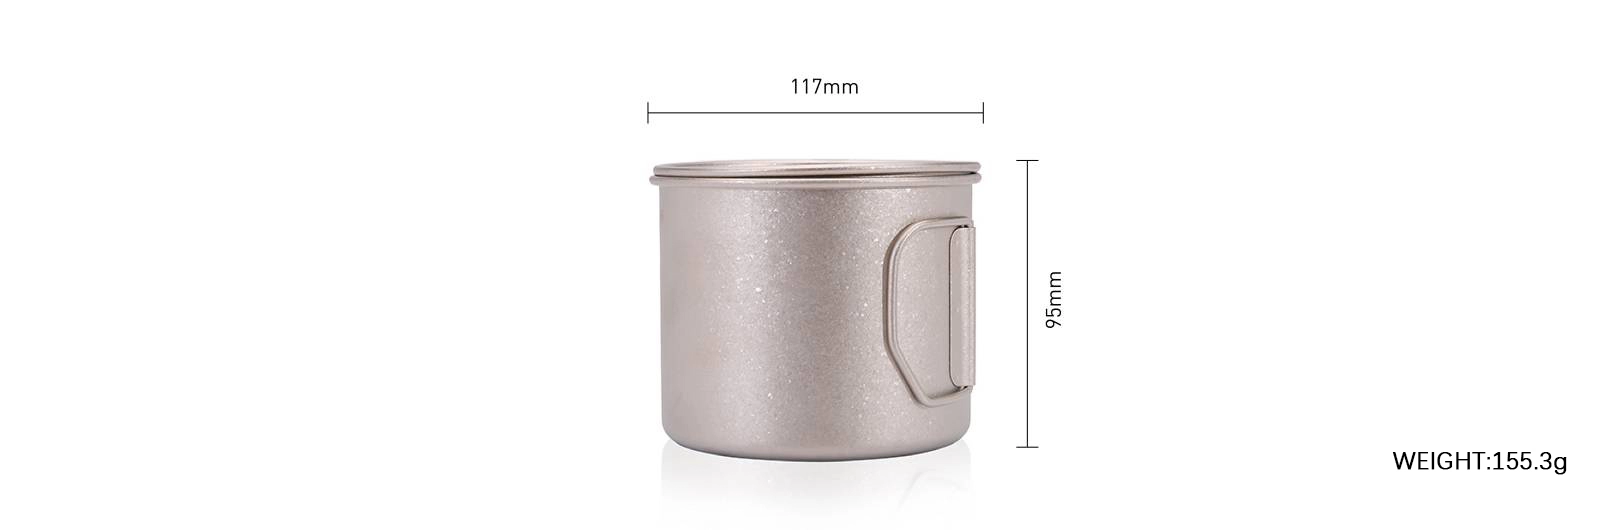 details of 750ml Coffee Mug Titanium Cup with Lid